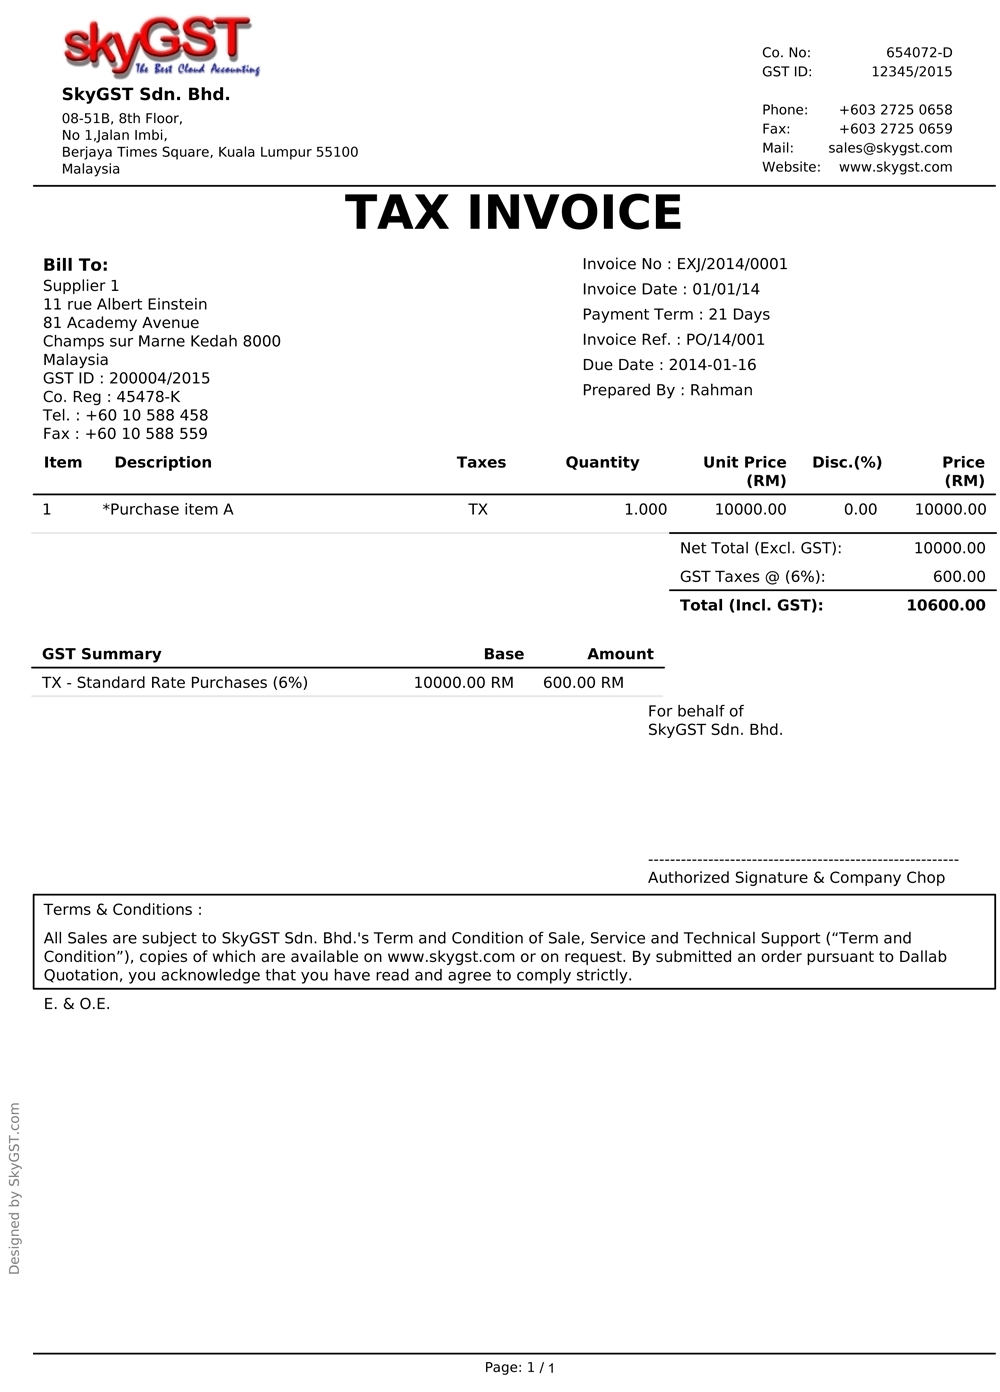 example invoice not gst registered design invoice template sample invoice with gst